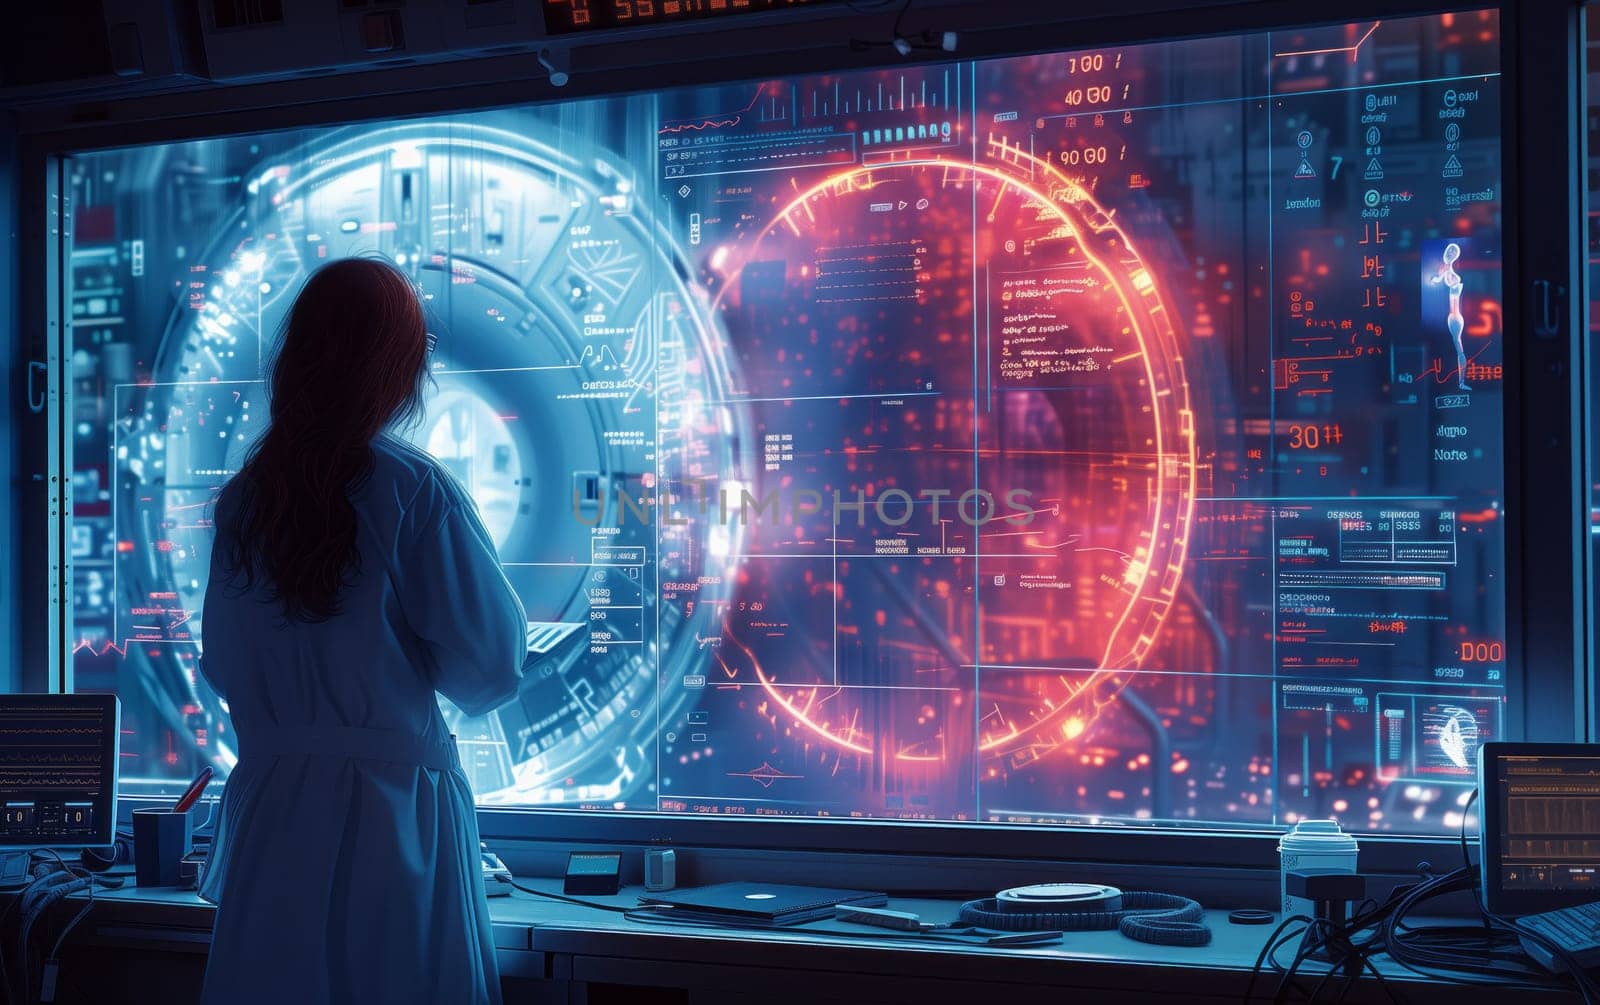 A woman in an electric blue lab coat stands in front of a large screen by richwolf